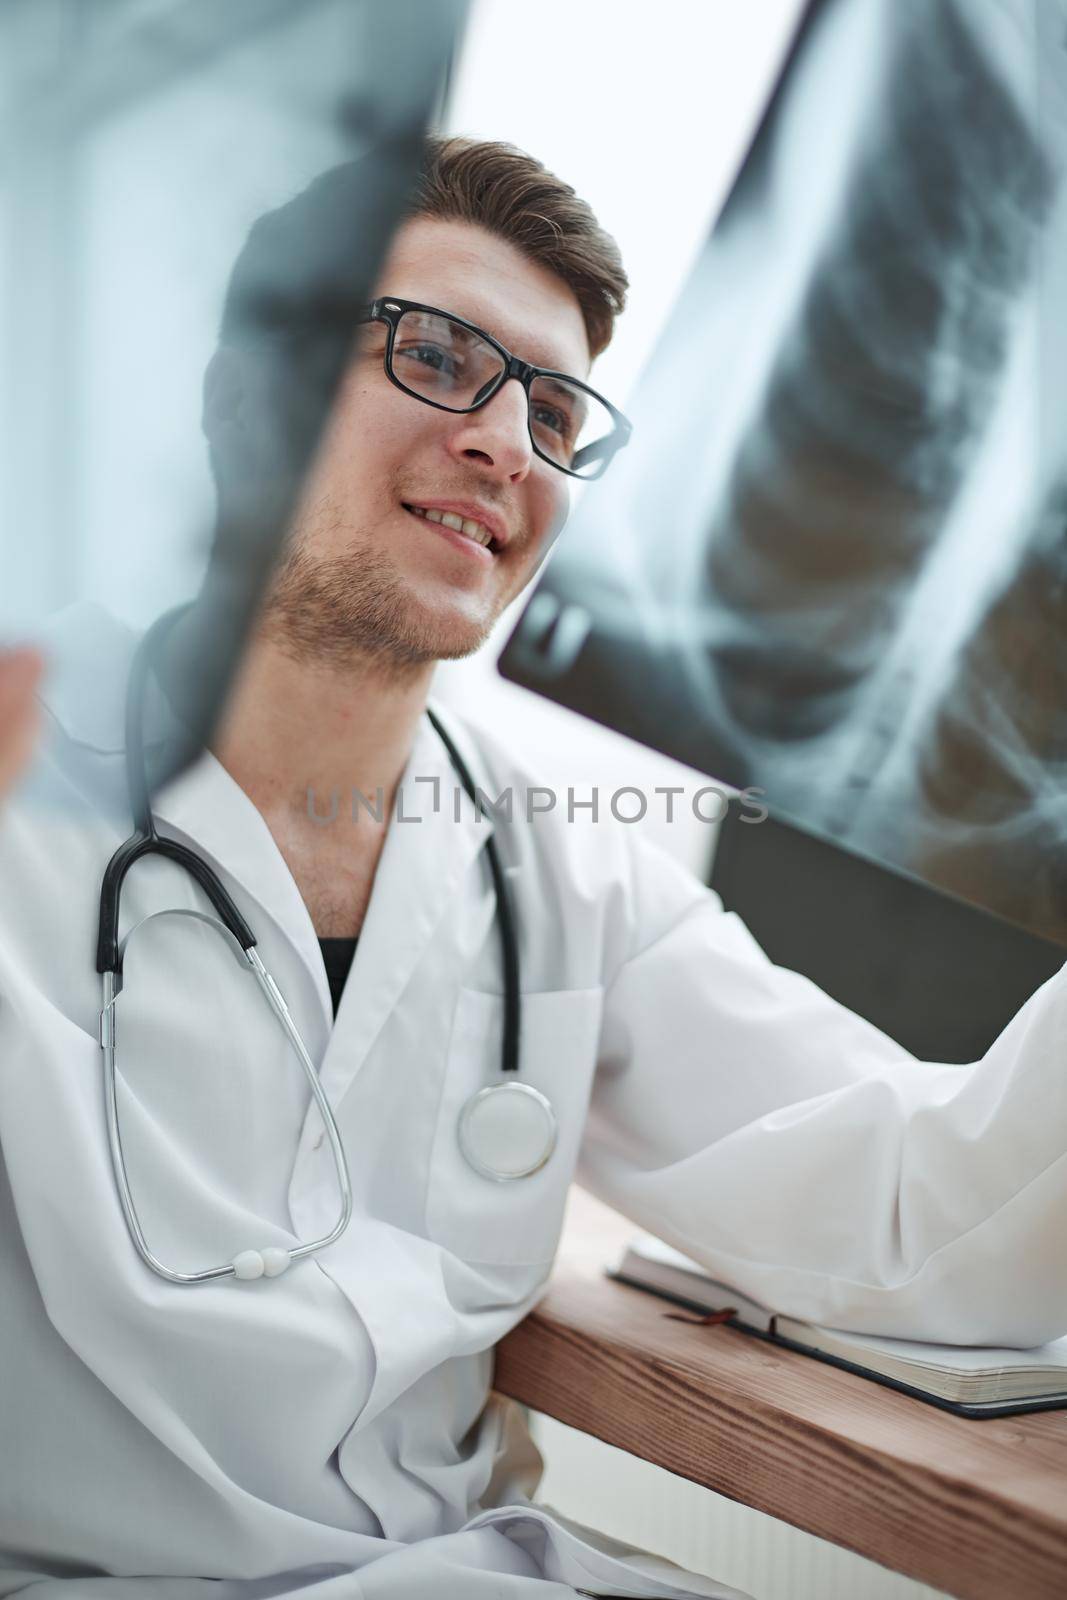 Male doctor in glass radiologist examines x-rays in a medical office.